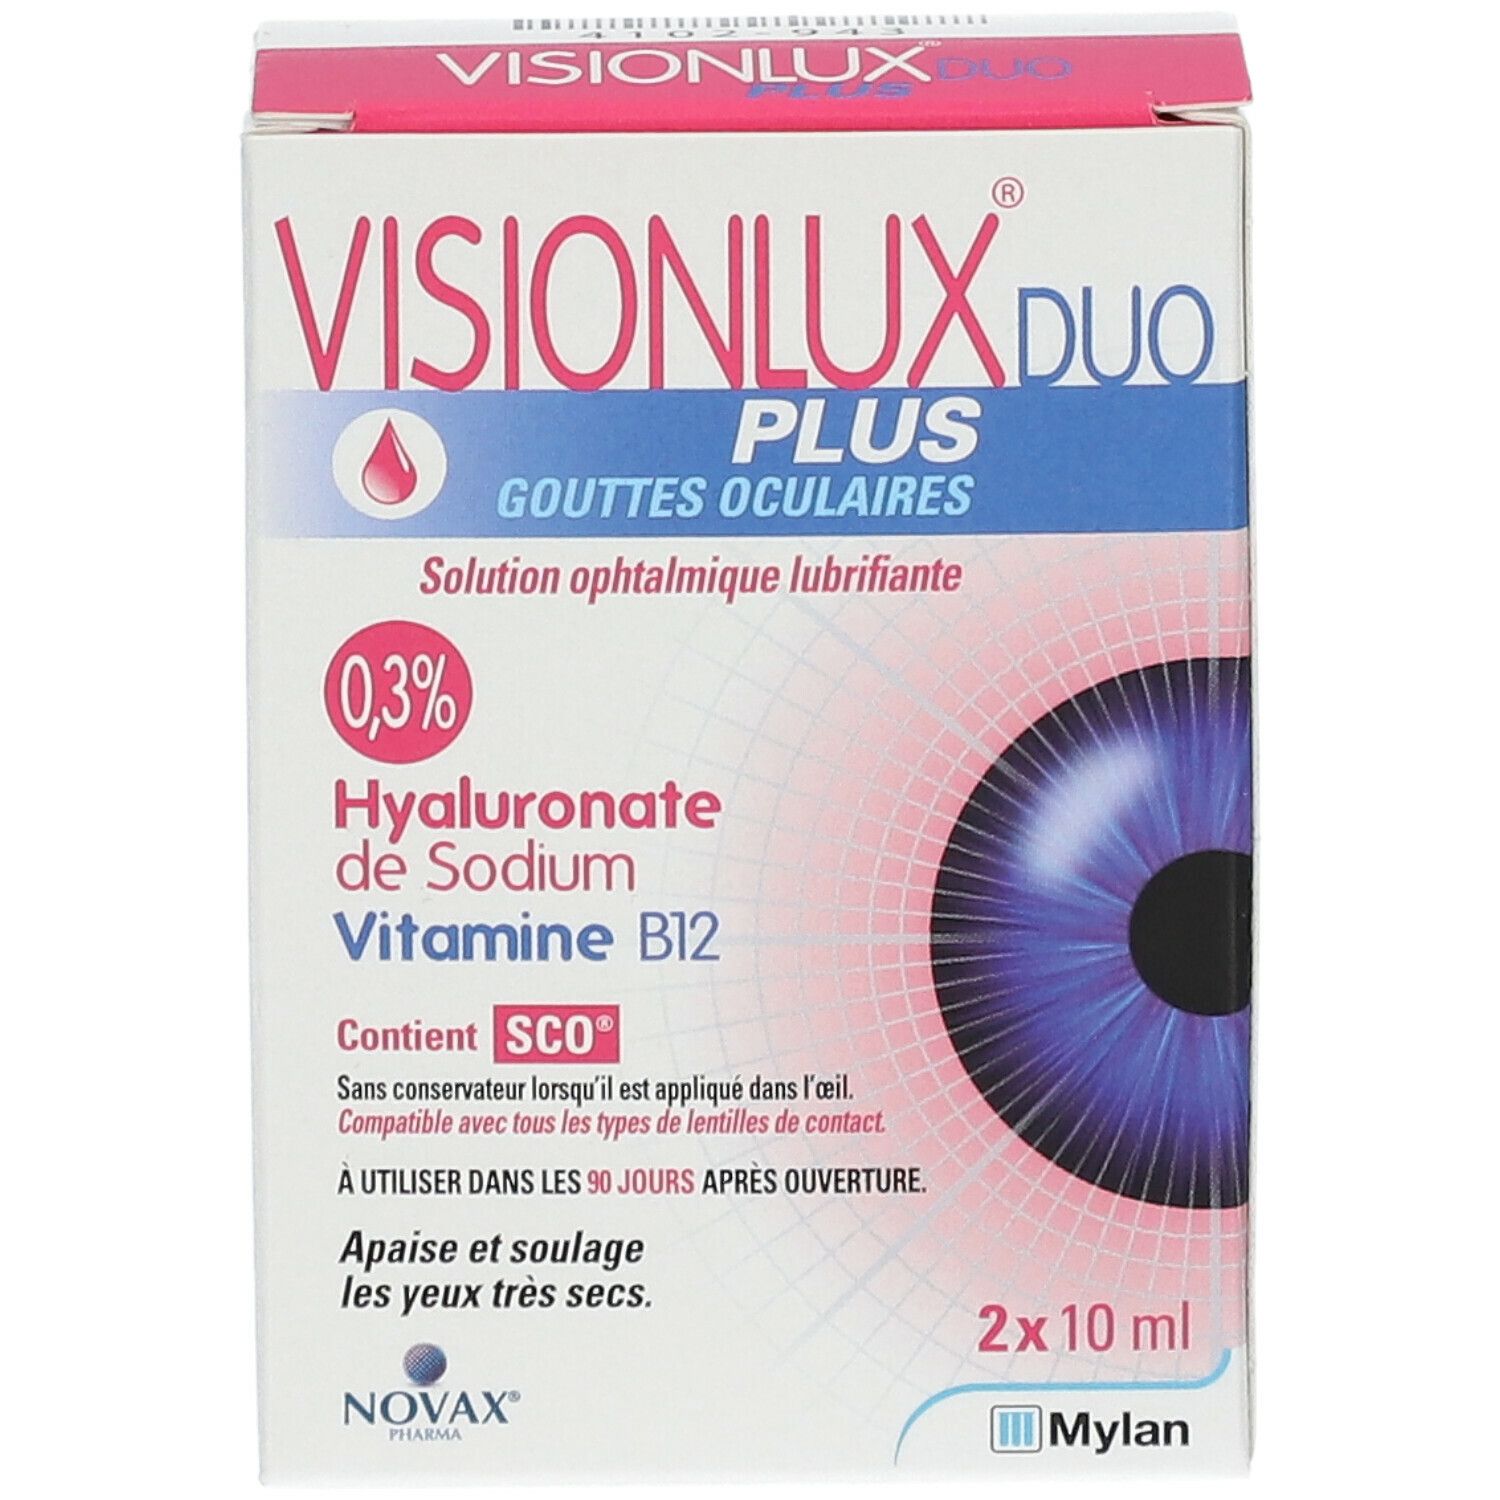 Visionlux® Plus Gouttes oculaires 10 ml - Redcare Pharmacie